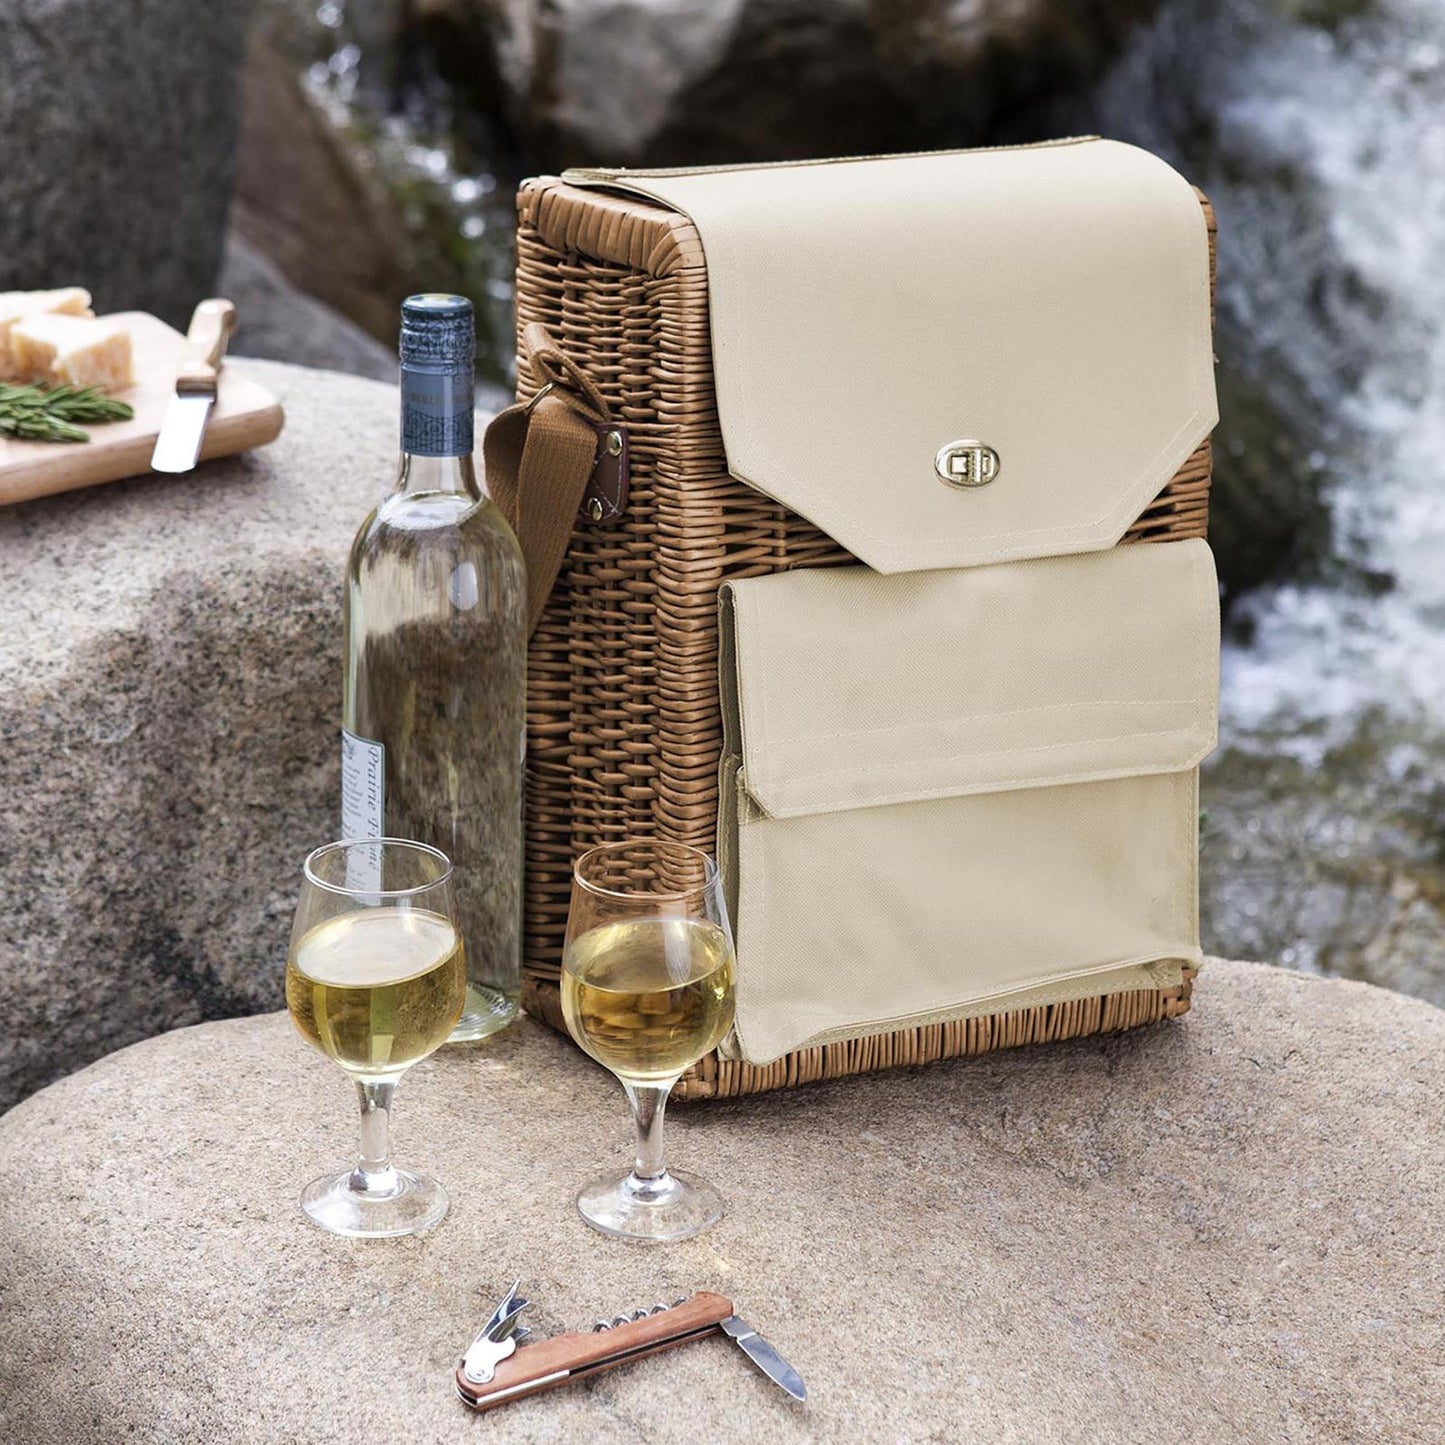 Over the Shoulder Wine & Cheese Picnic Basket